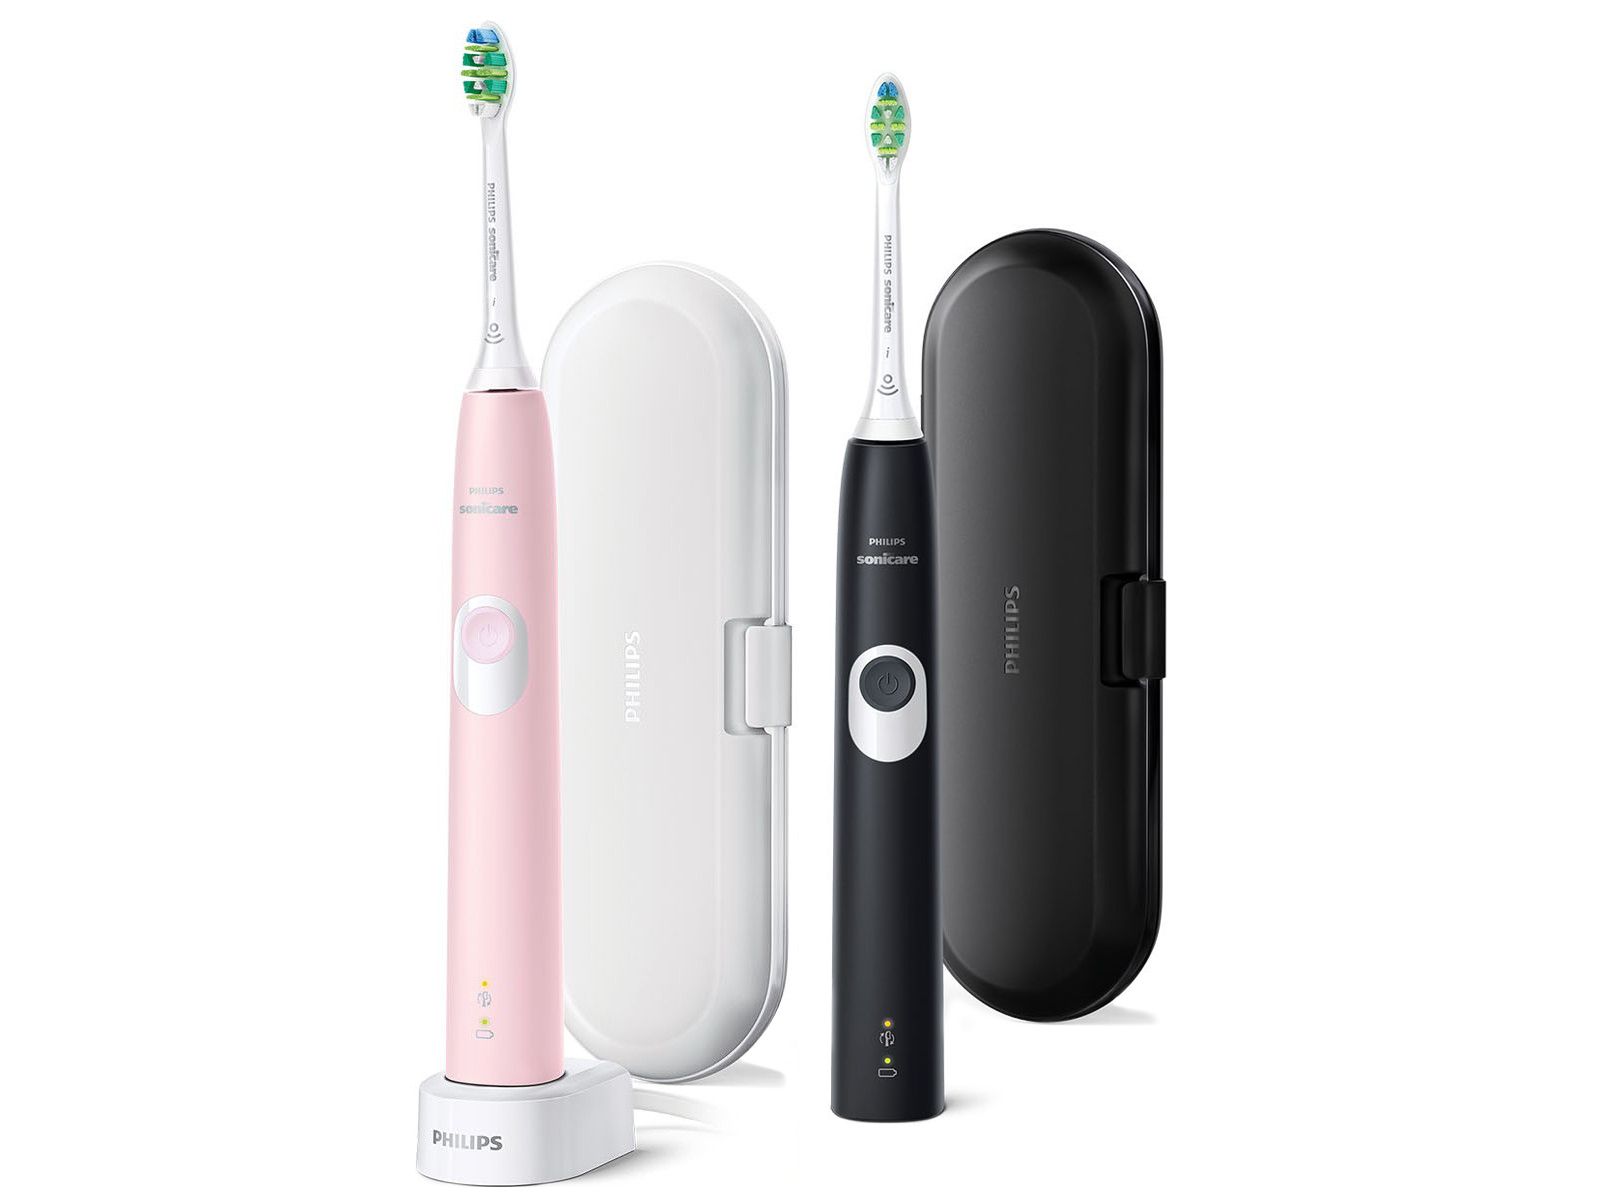 philips-sonicare-protectiveclean-4300